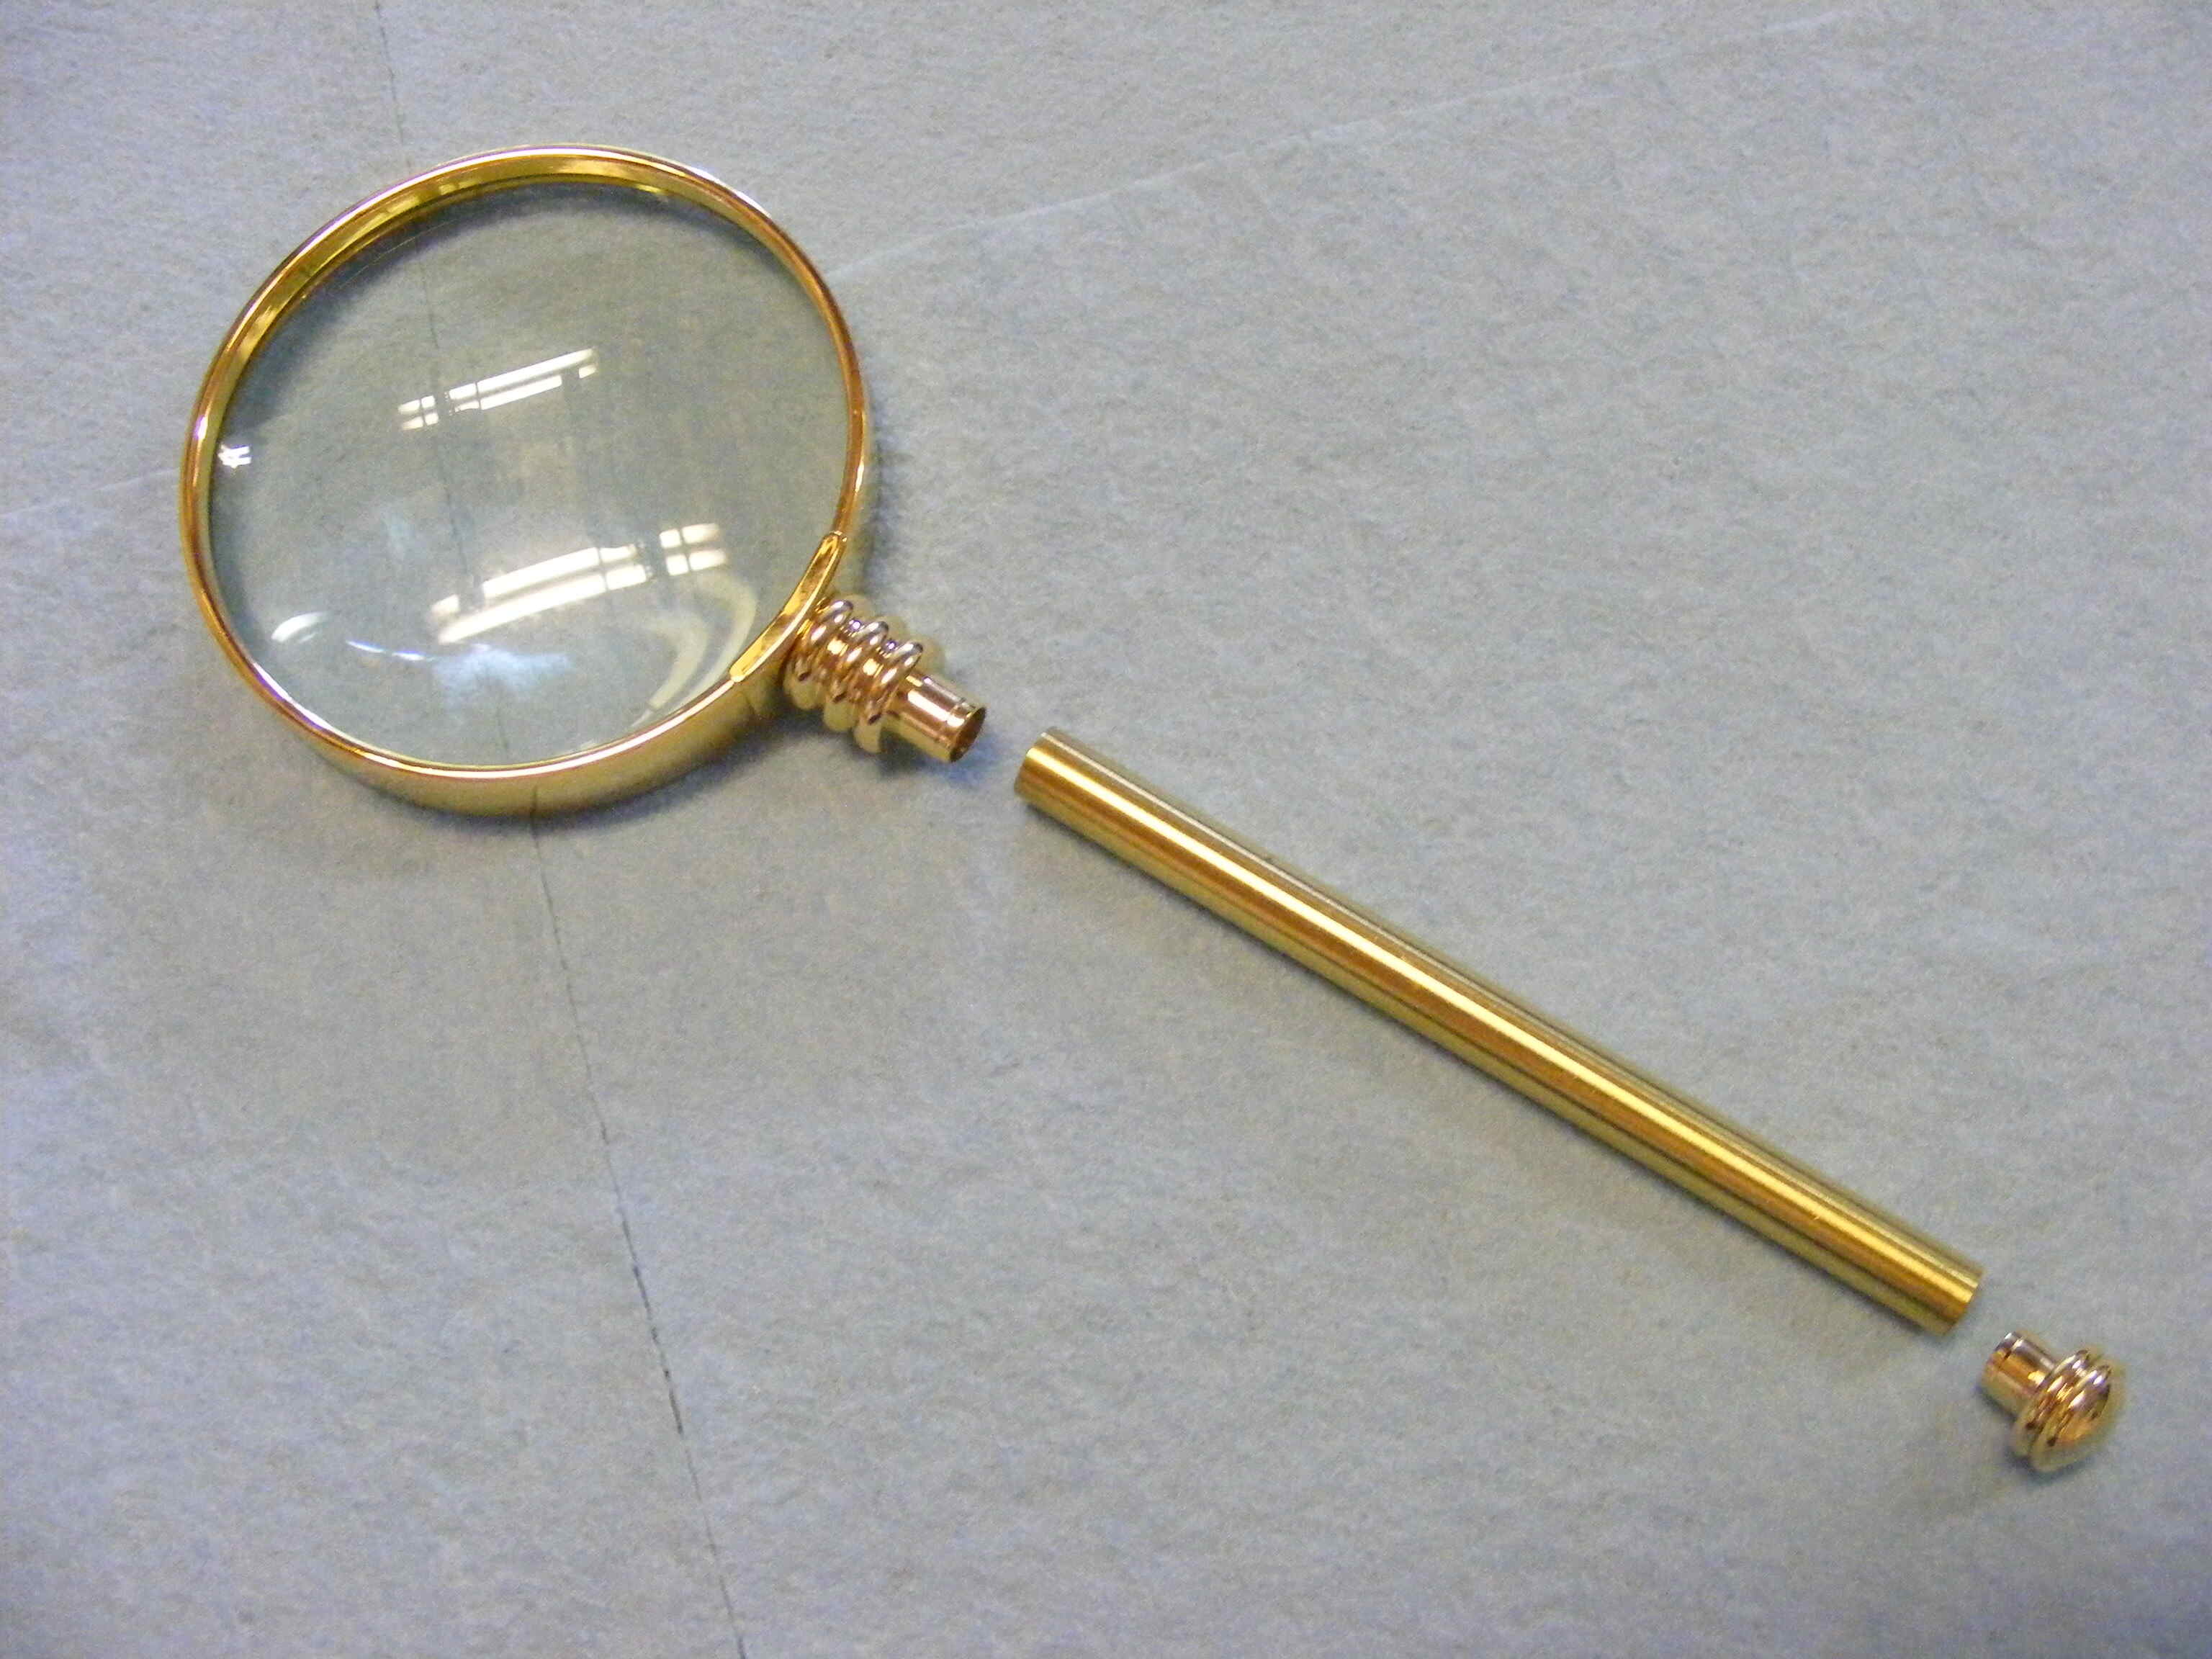 diy-magnifiers-creating-your-own-magnifying-glass